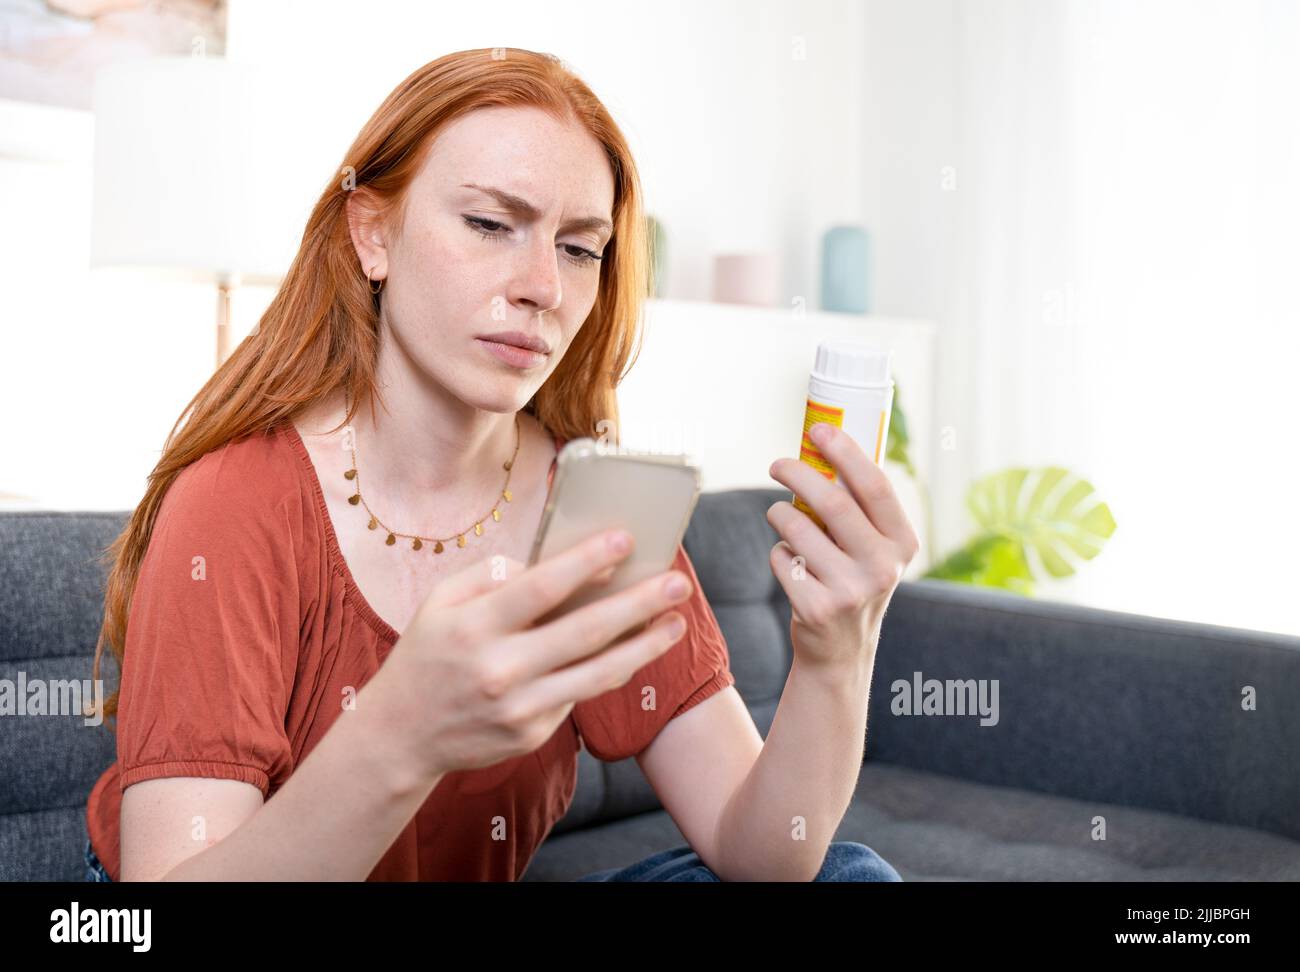 Woman checking medicine pill components on internet Stock Photo